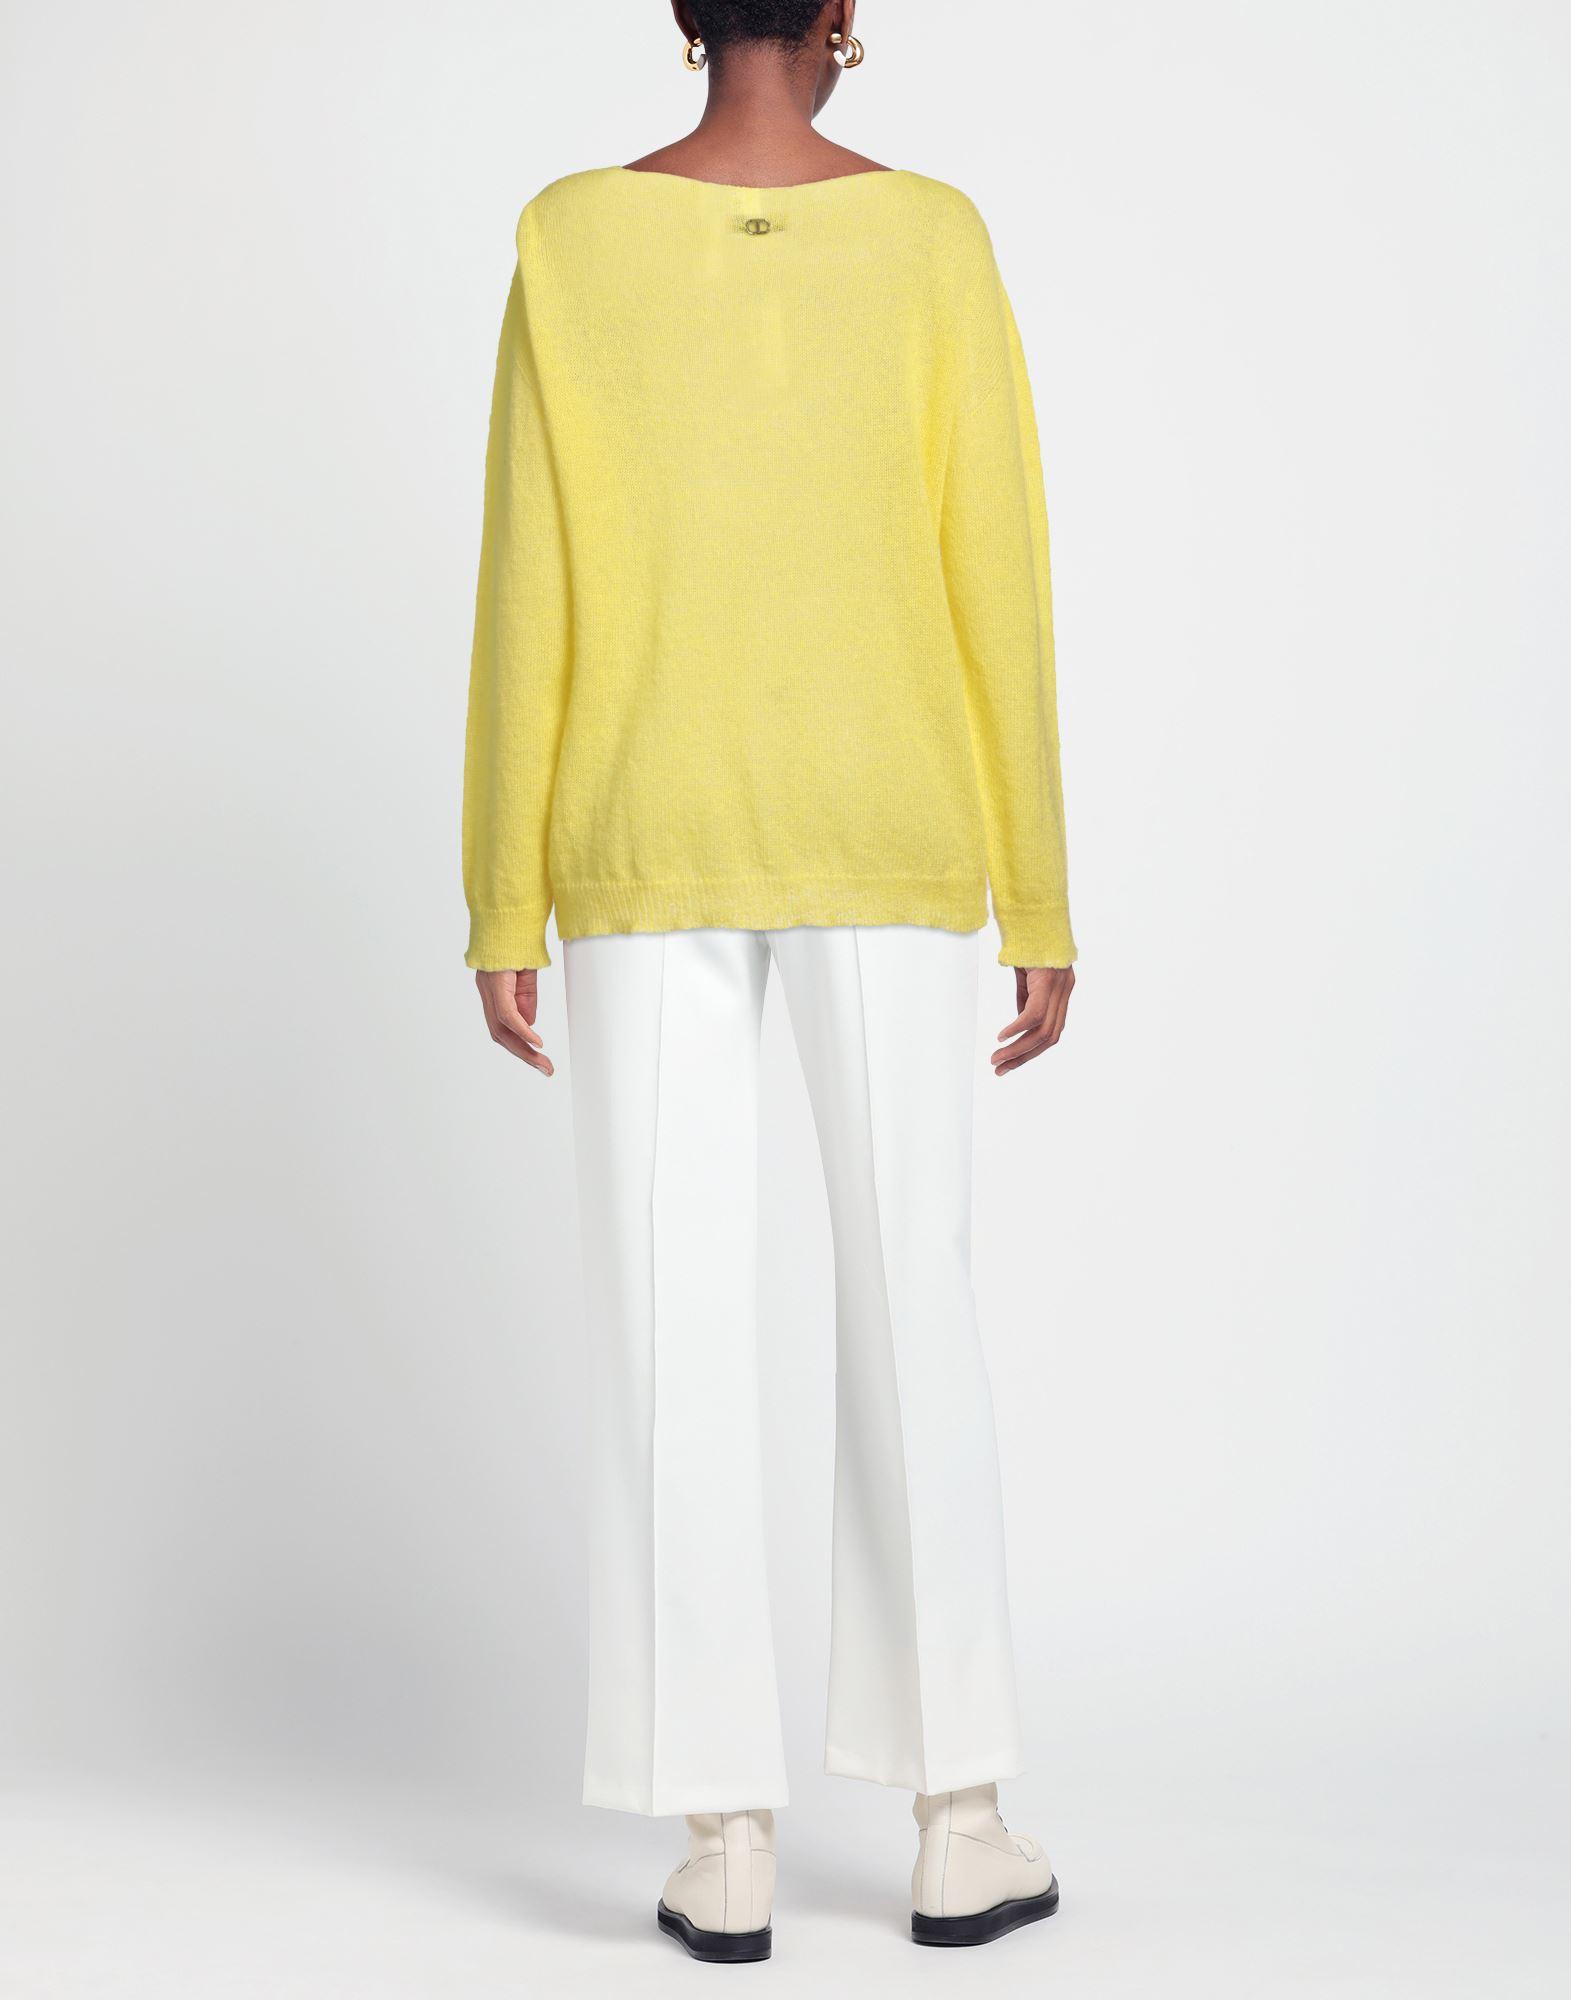 Twinset Jumper in Yellow | Lyst